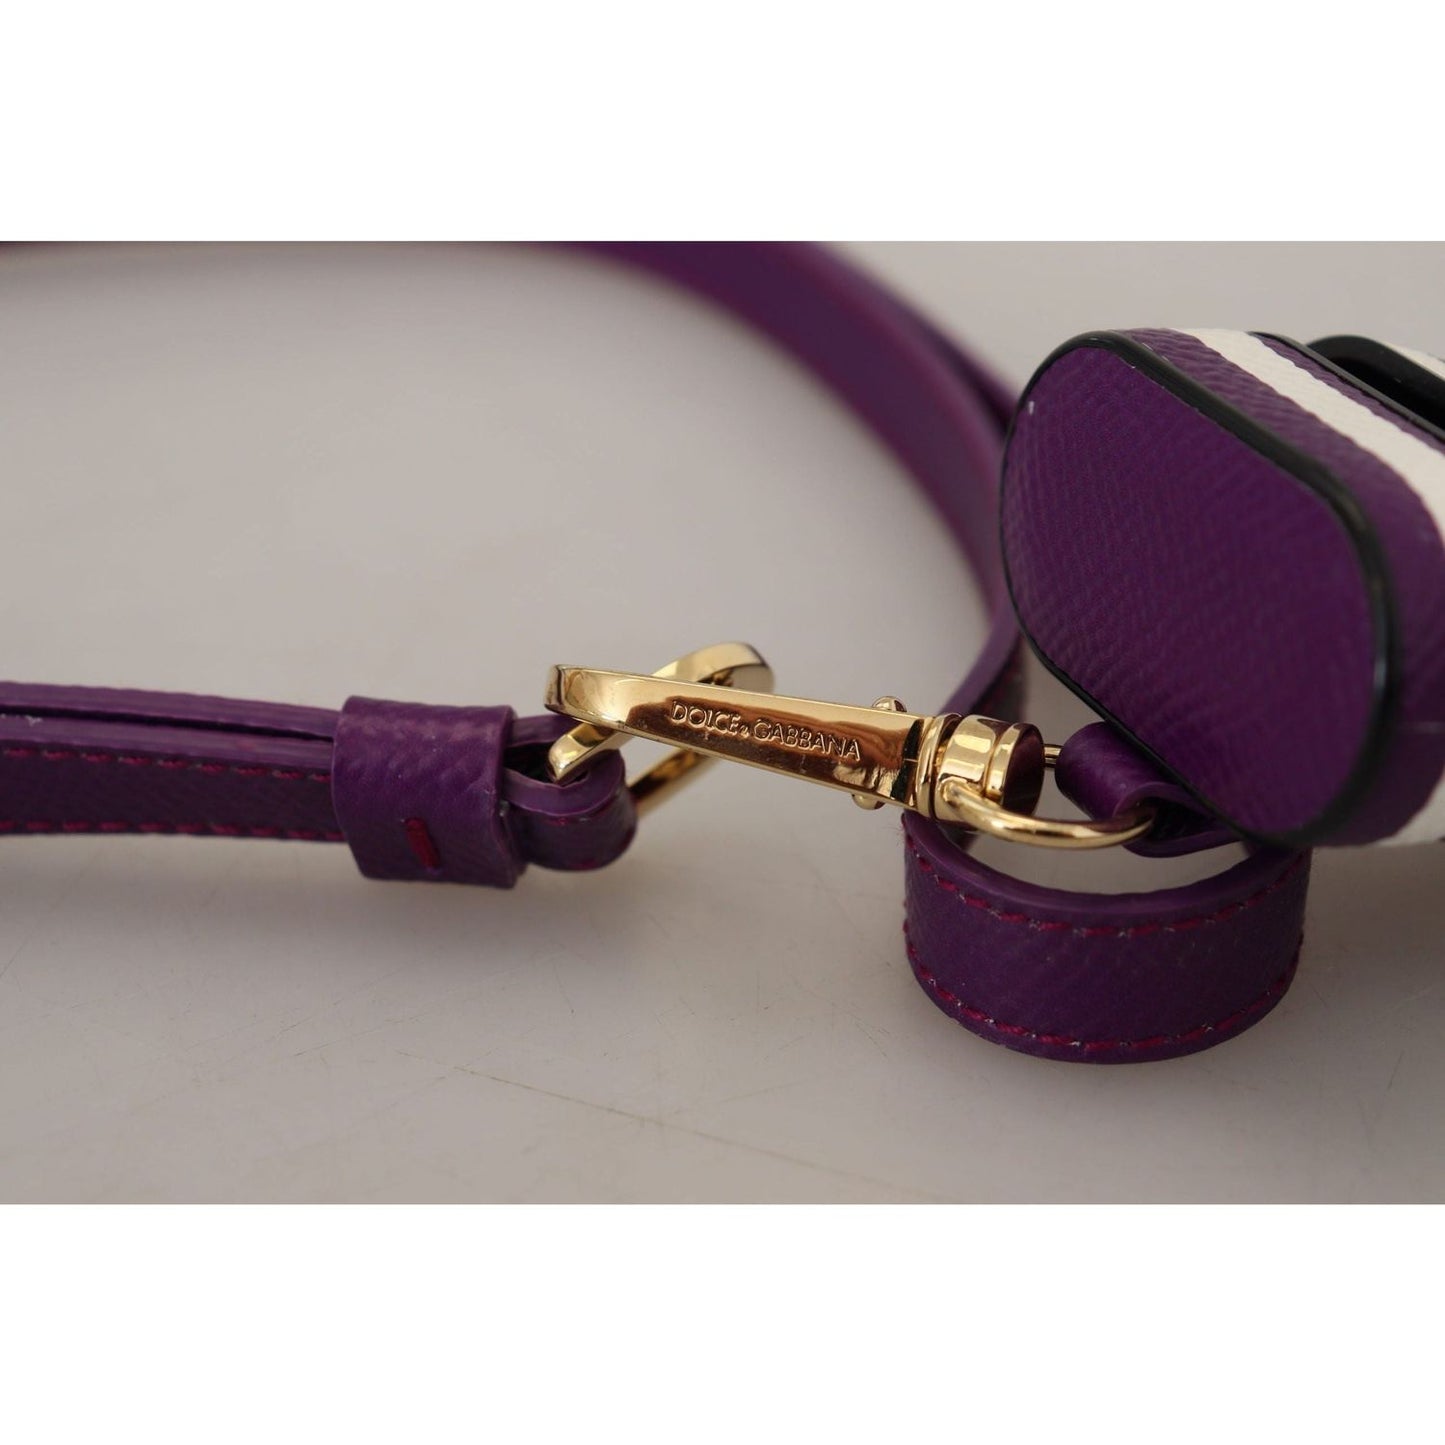 Dolce & Gabbana Chic Purple Leather Airpods Case purple-leather-strap-gold-metal-logo-airpods-case